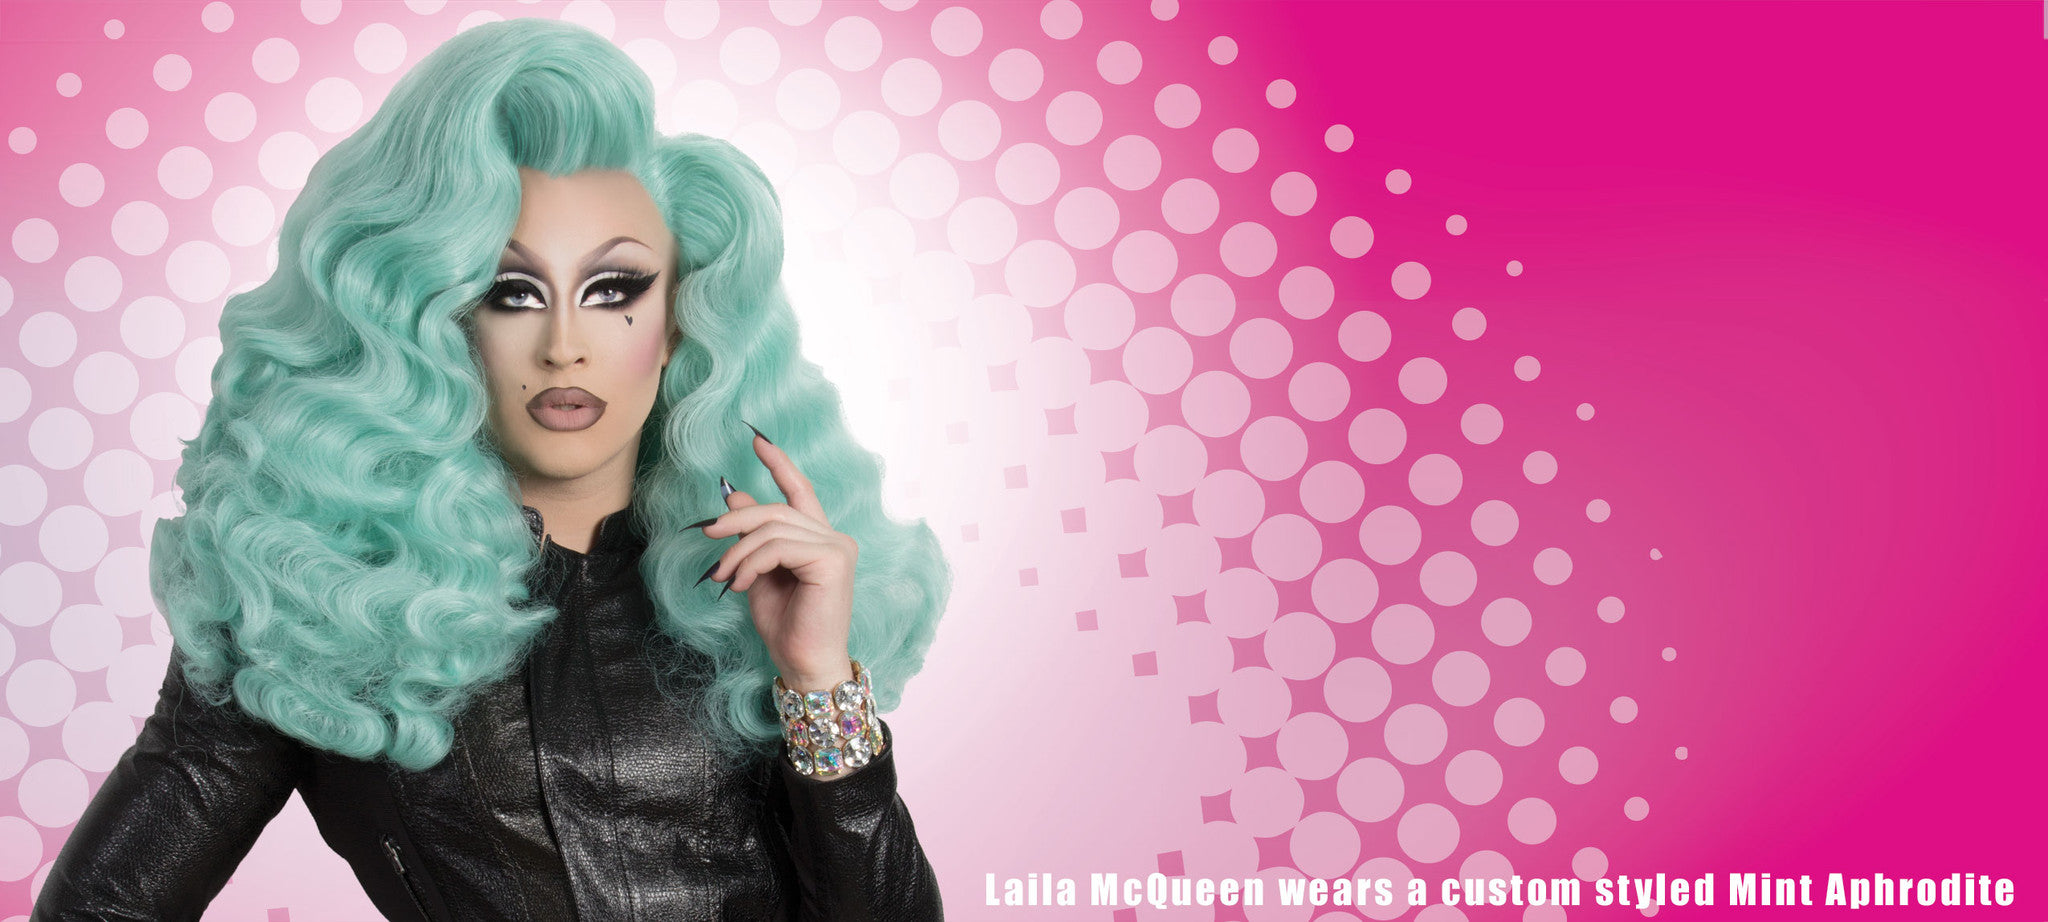 Beste Wigs & Grace - Drag queen wigs and false lashes for everyone! YL-15